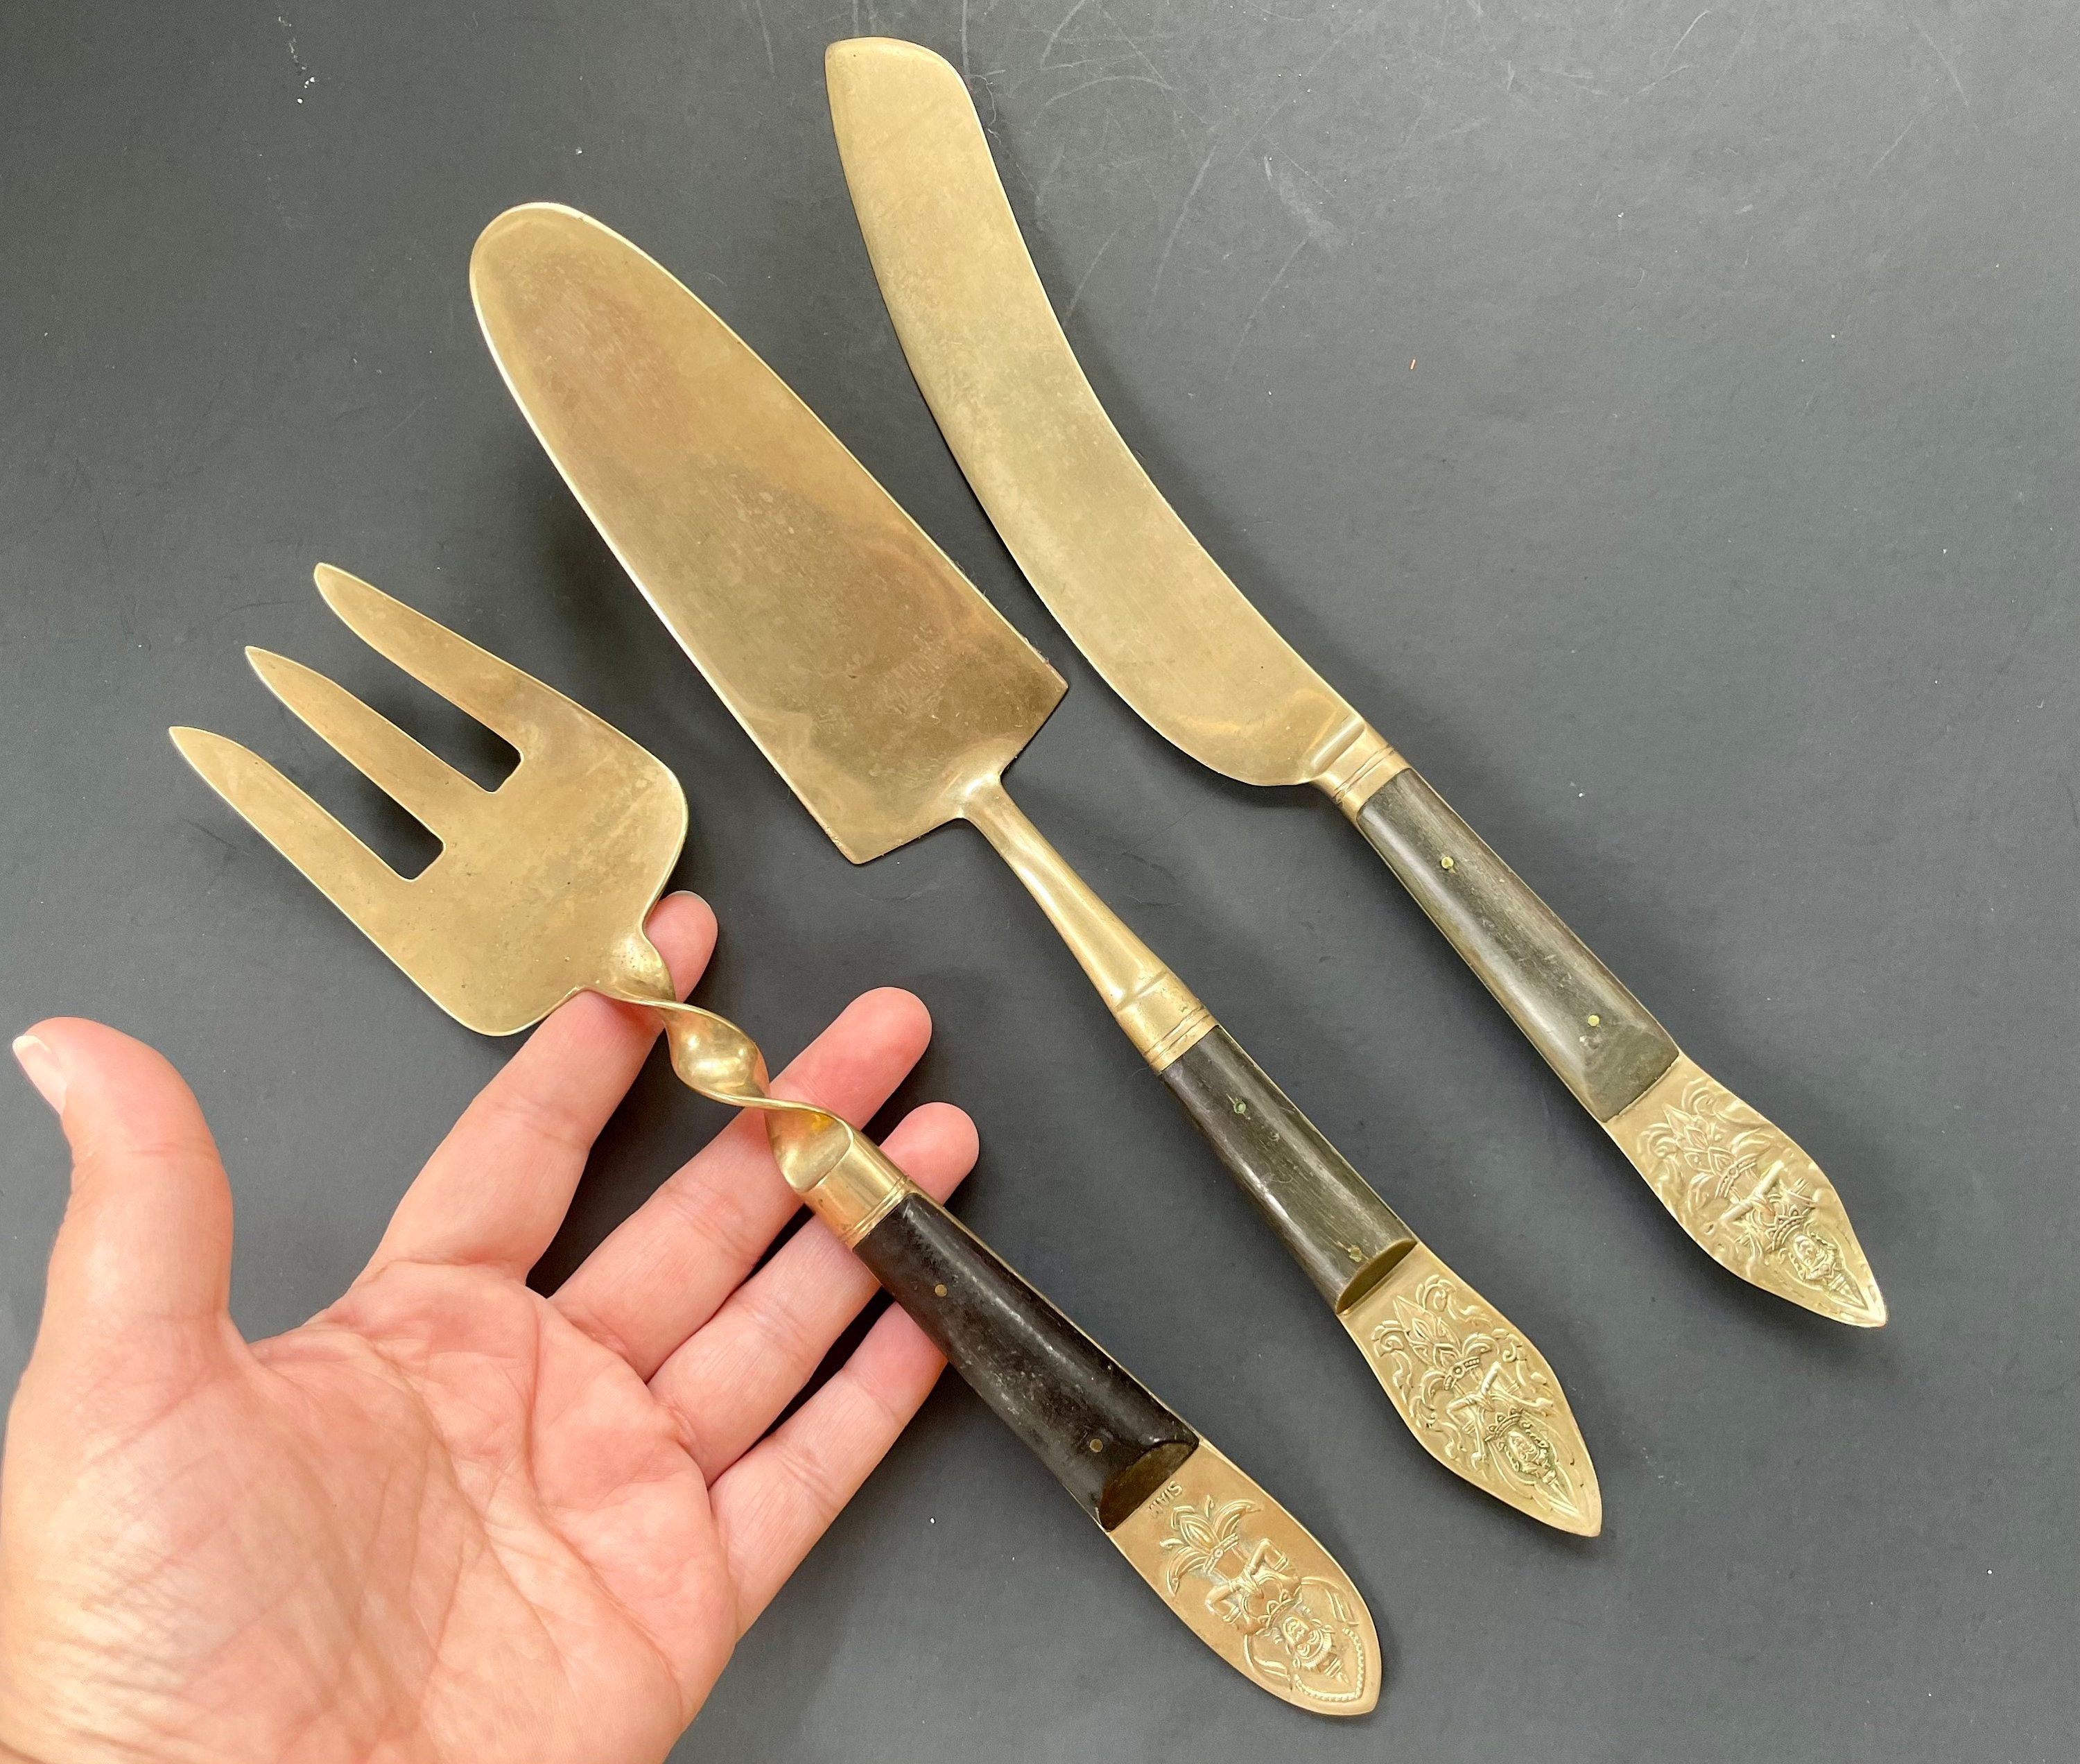 Vintage Siam Spatula Server Fork & Knife Set in Brass and Wood With Buddha  Decoration Marked, Pie Server Knife Brass and Wood Thailand -  Canada